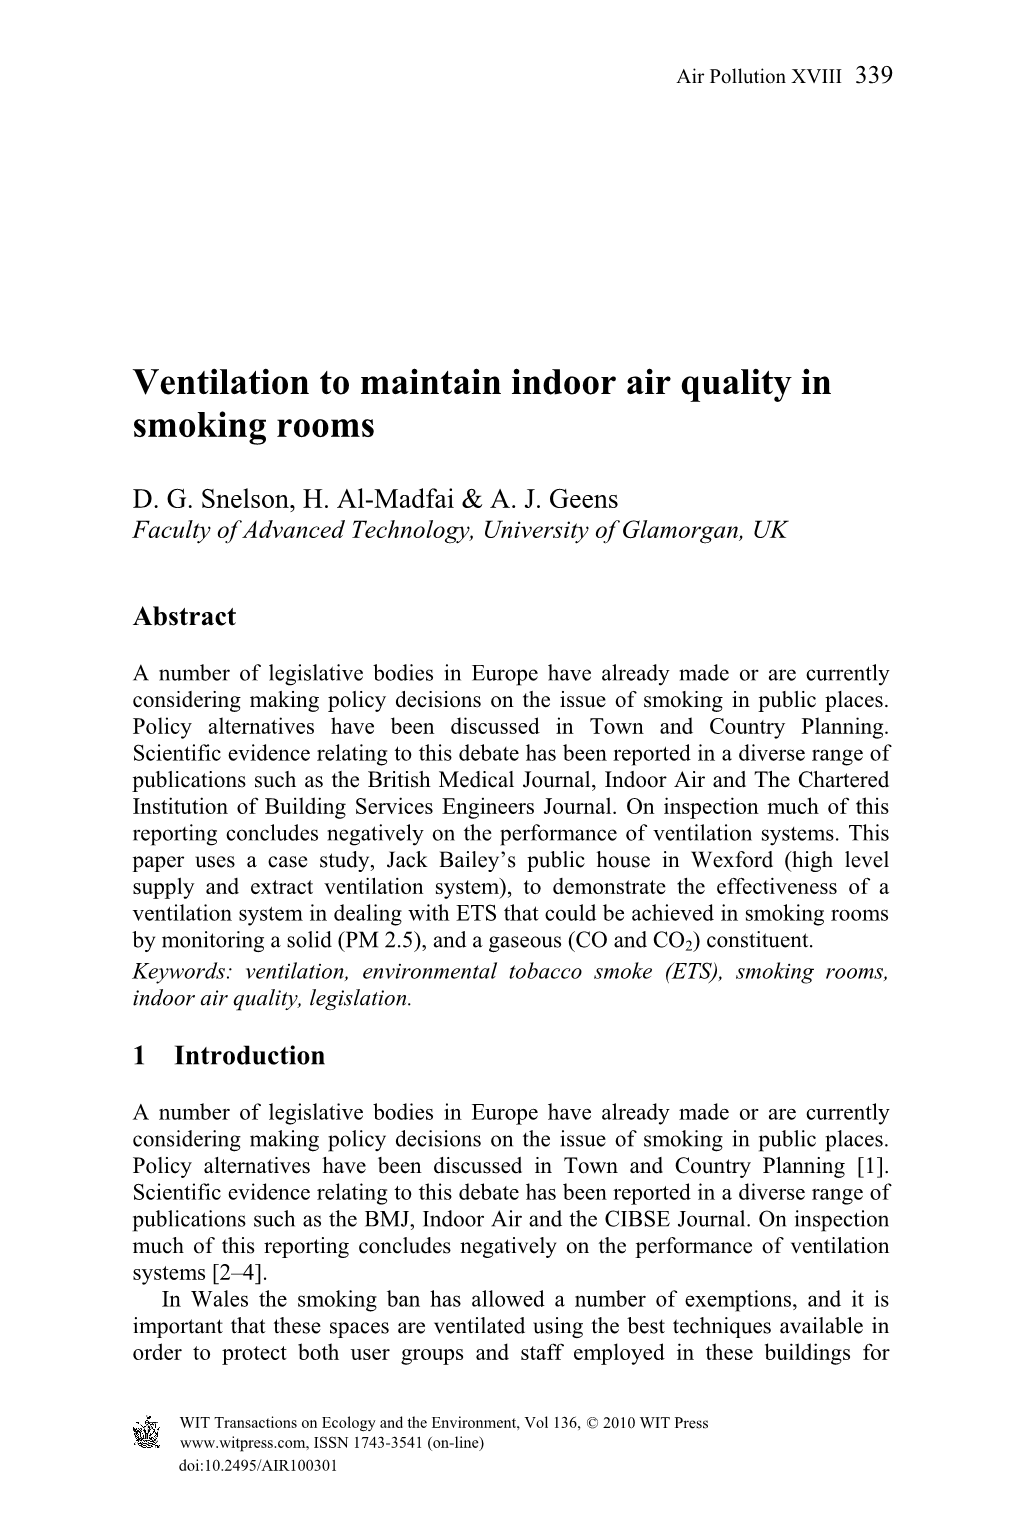 Ventilation to Maintain Indoor Air Quality in Smoking Rooms